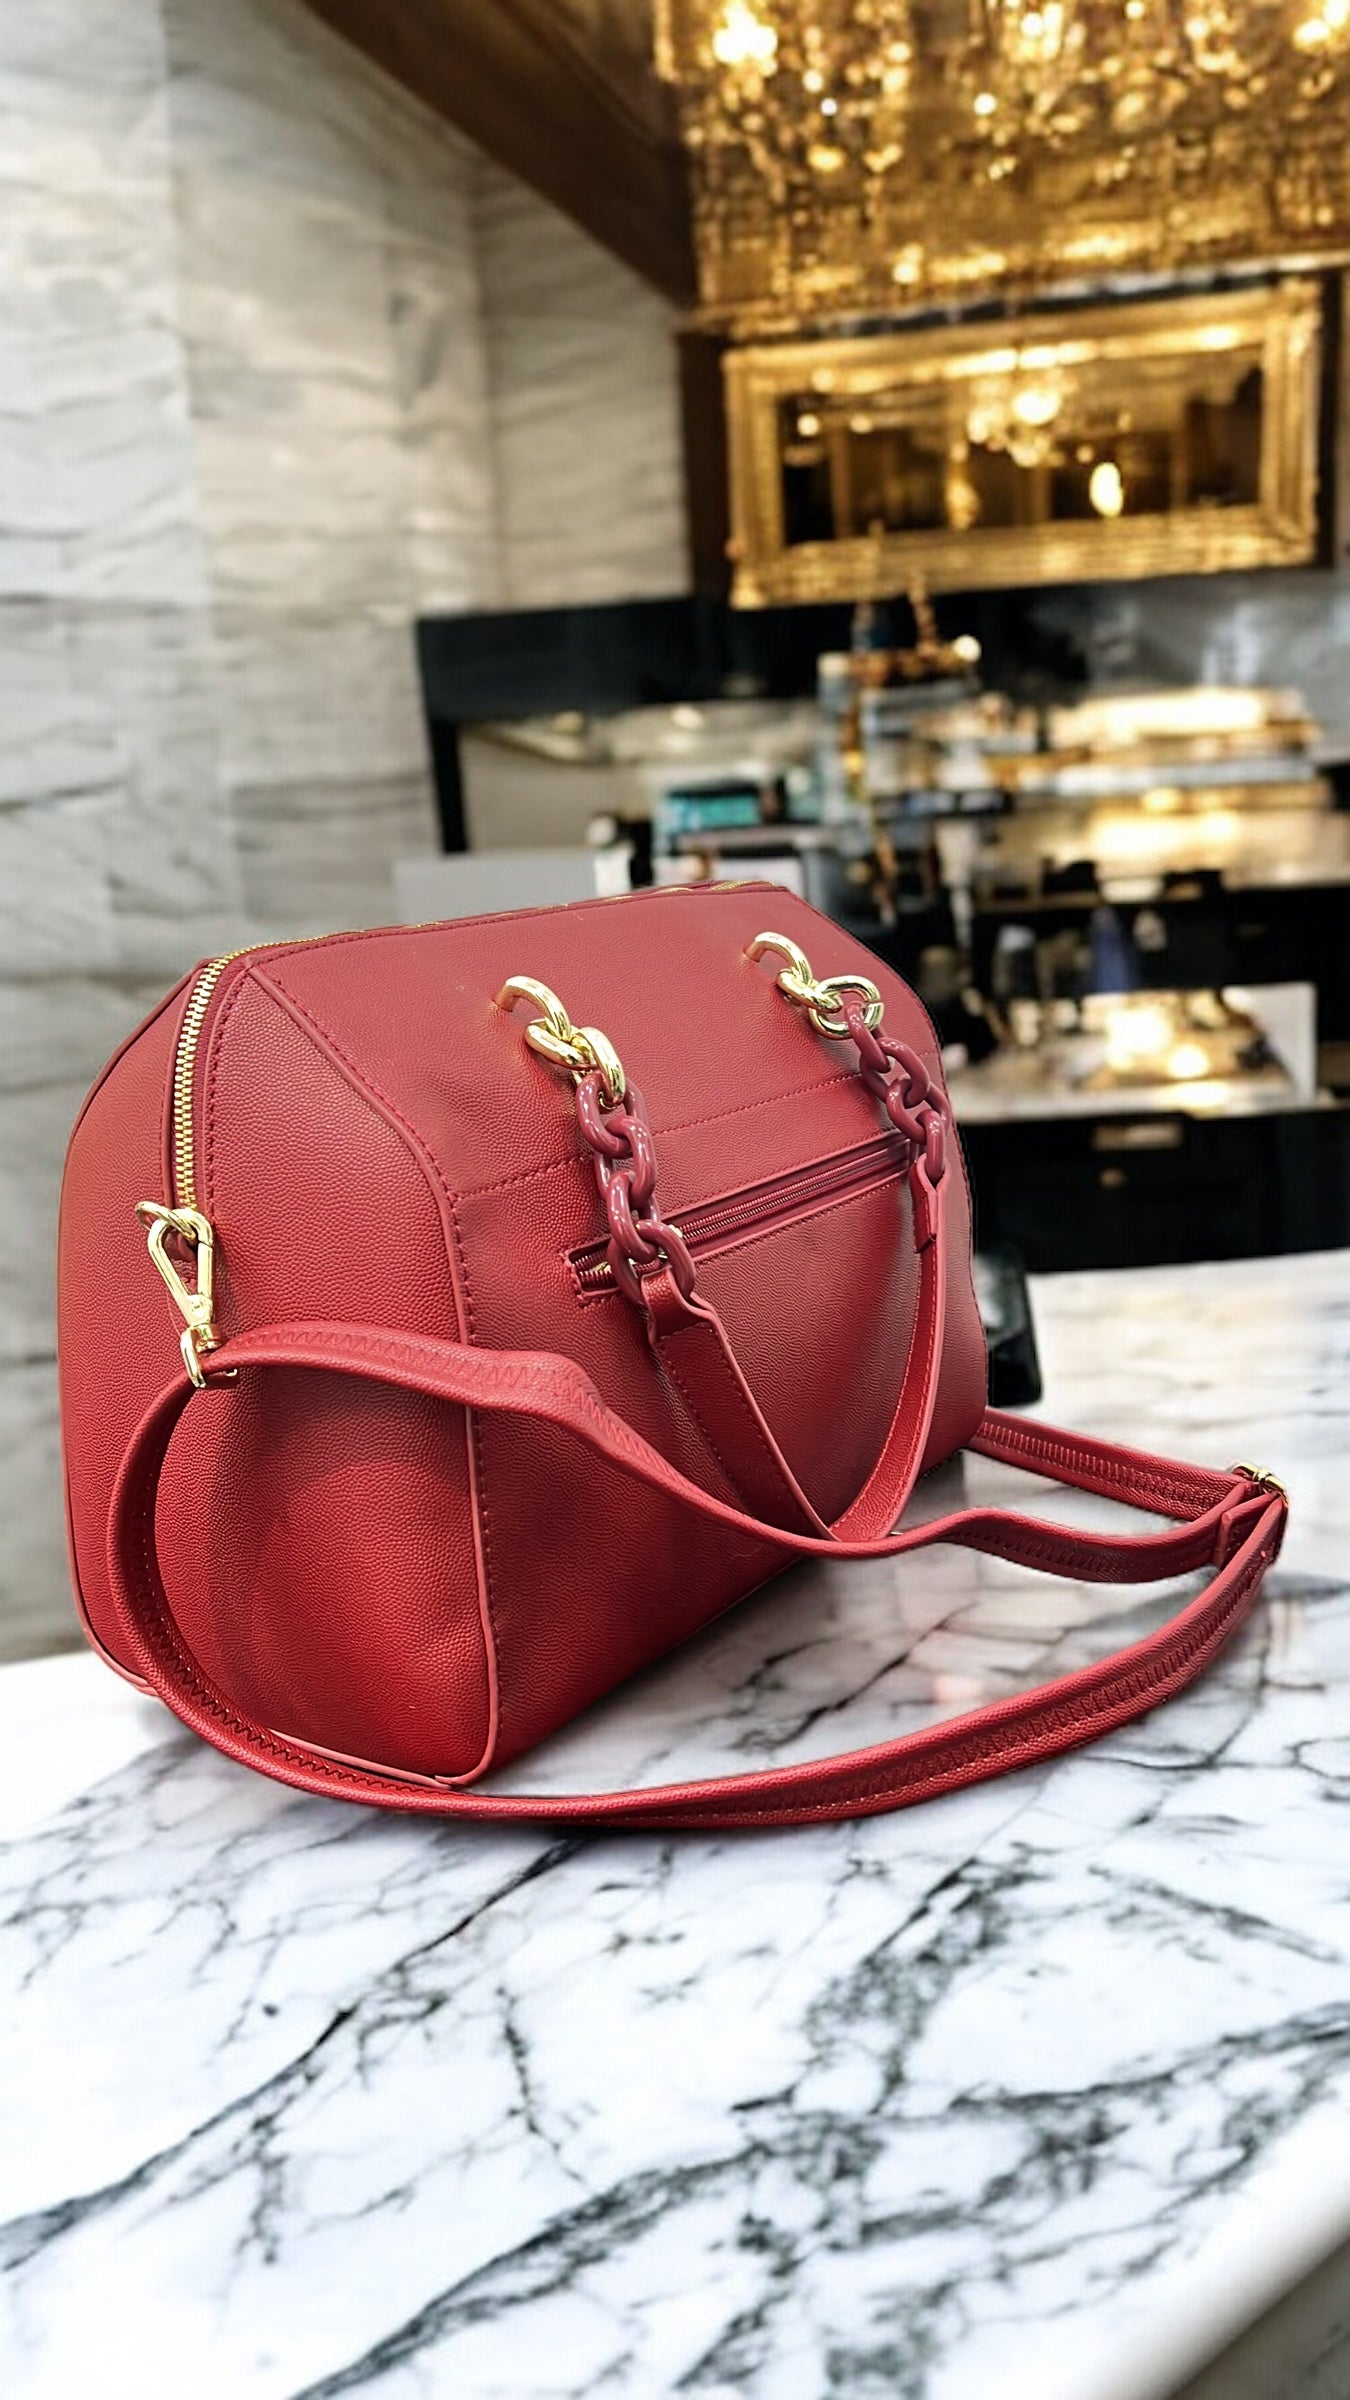 CHRISBELLA TEXTURED DOCTOR BAG IN RED